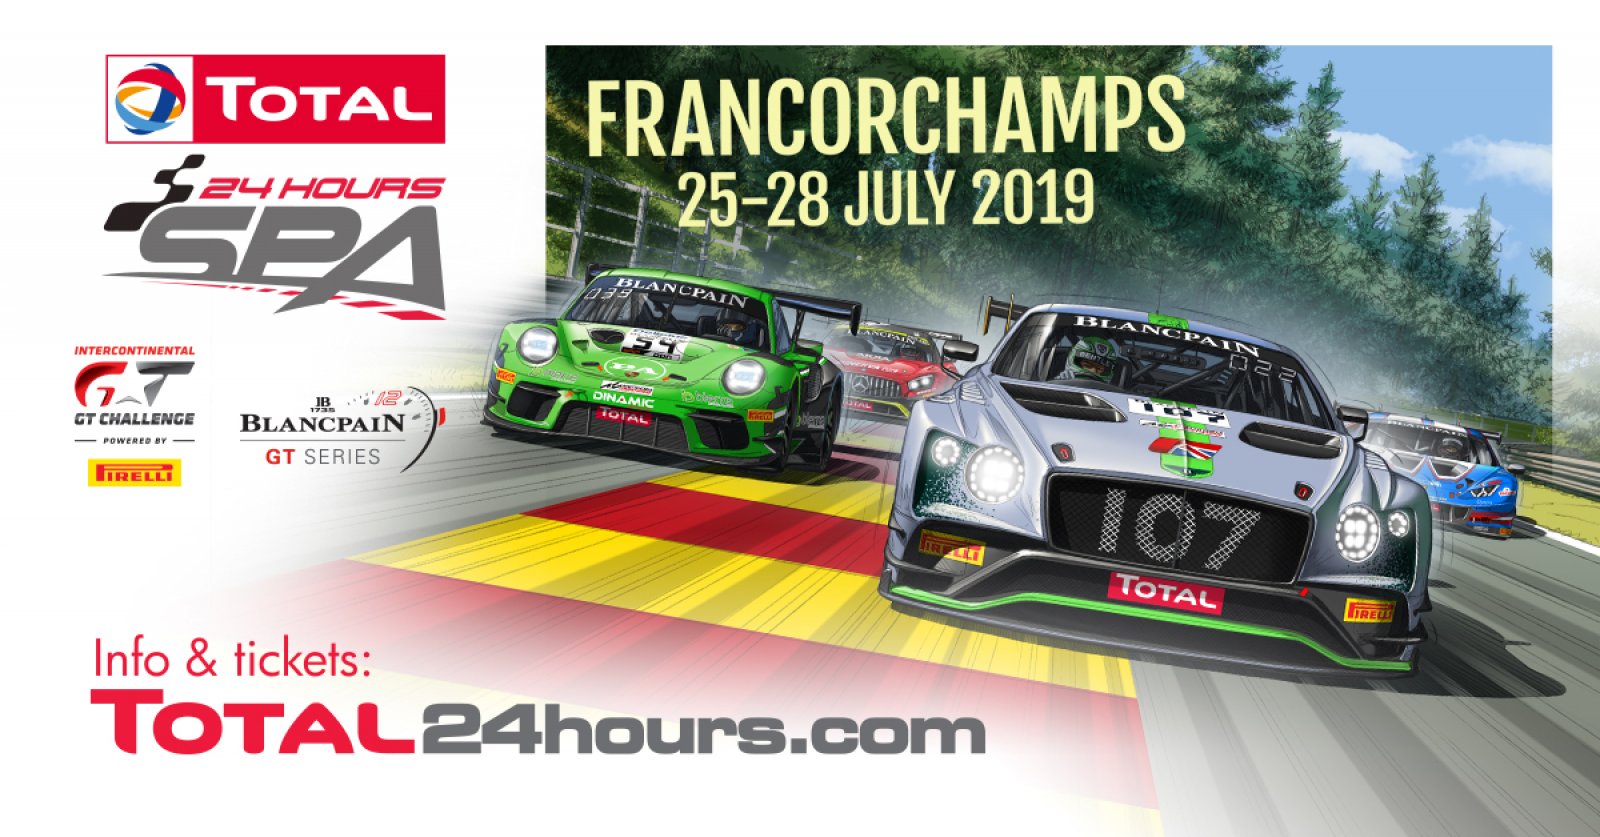 Total 24 Hours of Spa delivers record-breaking 72-car entry list to confirm status as world's premier GT race